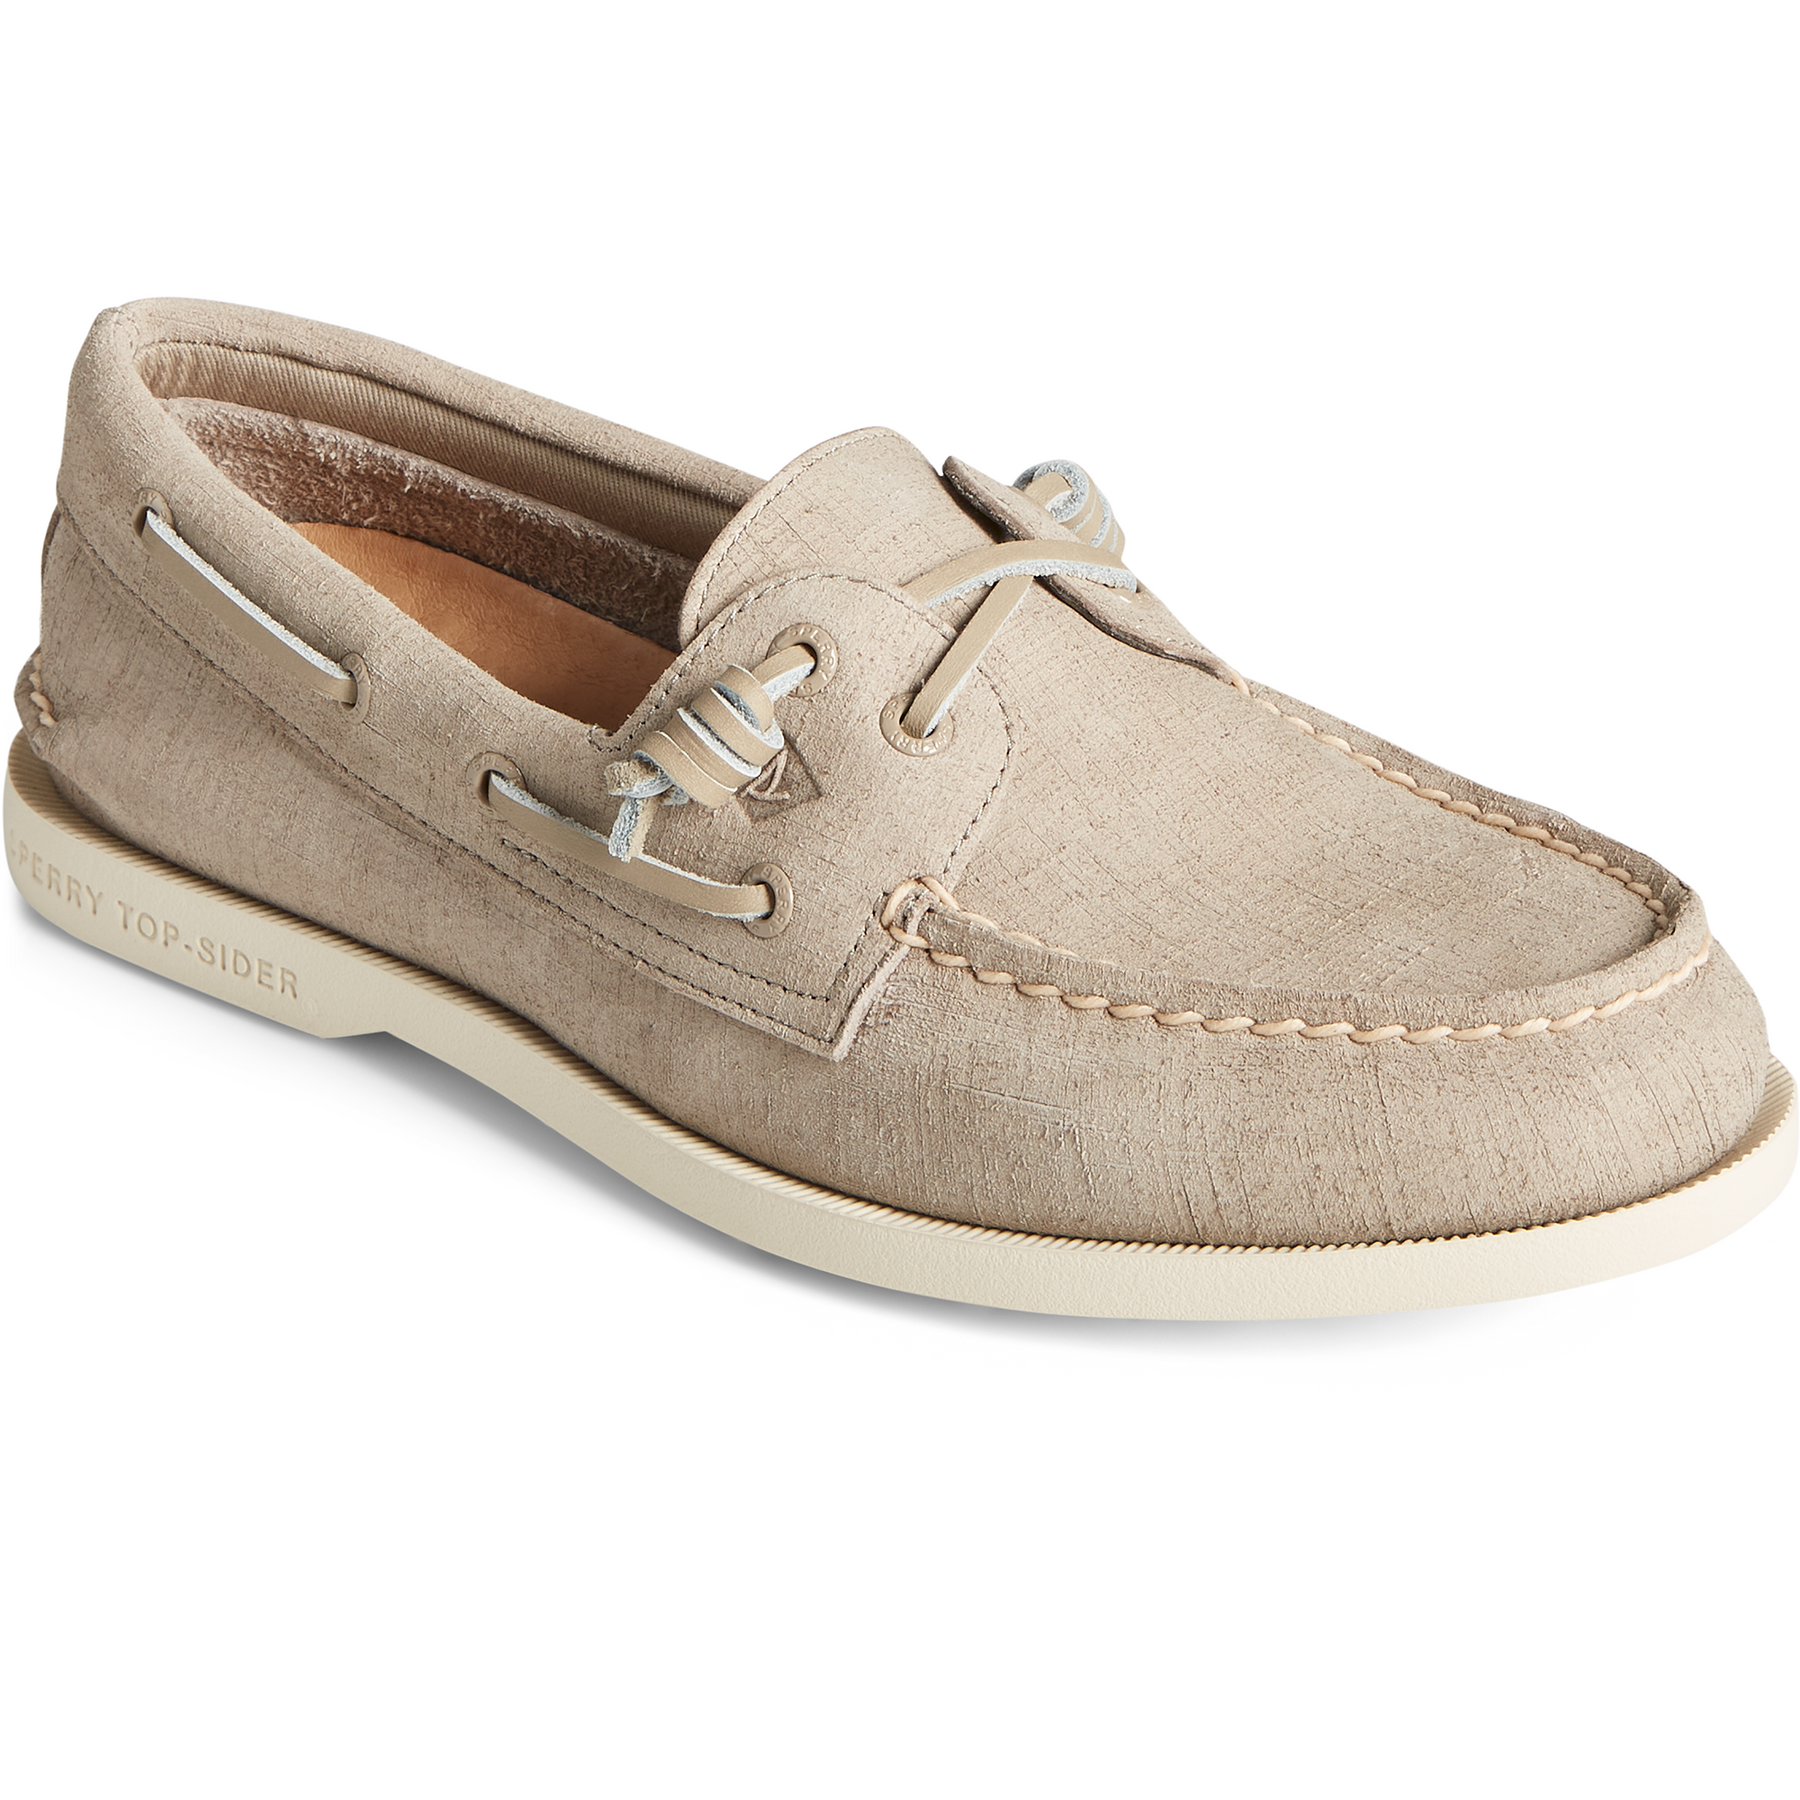 Women's Authentic Original 2-Eye PLUSHWAVE Checkmate Dessert/Taupe Boat Shoe (STS86658)